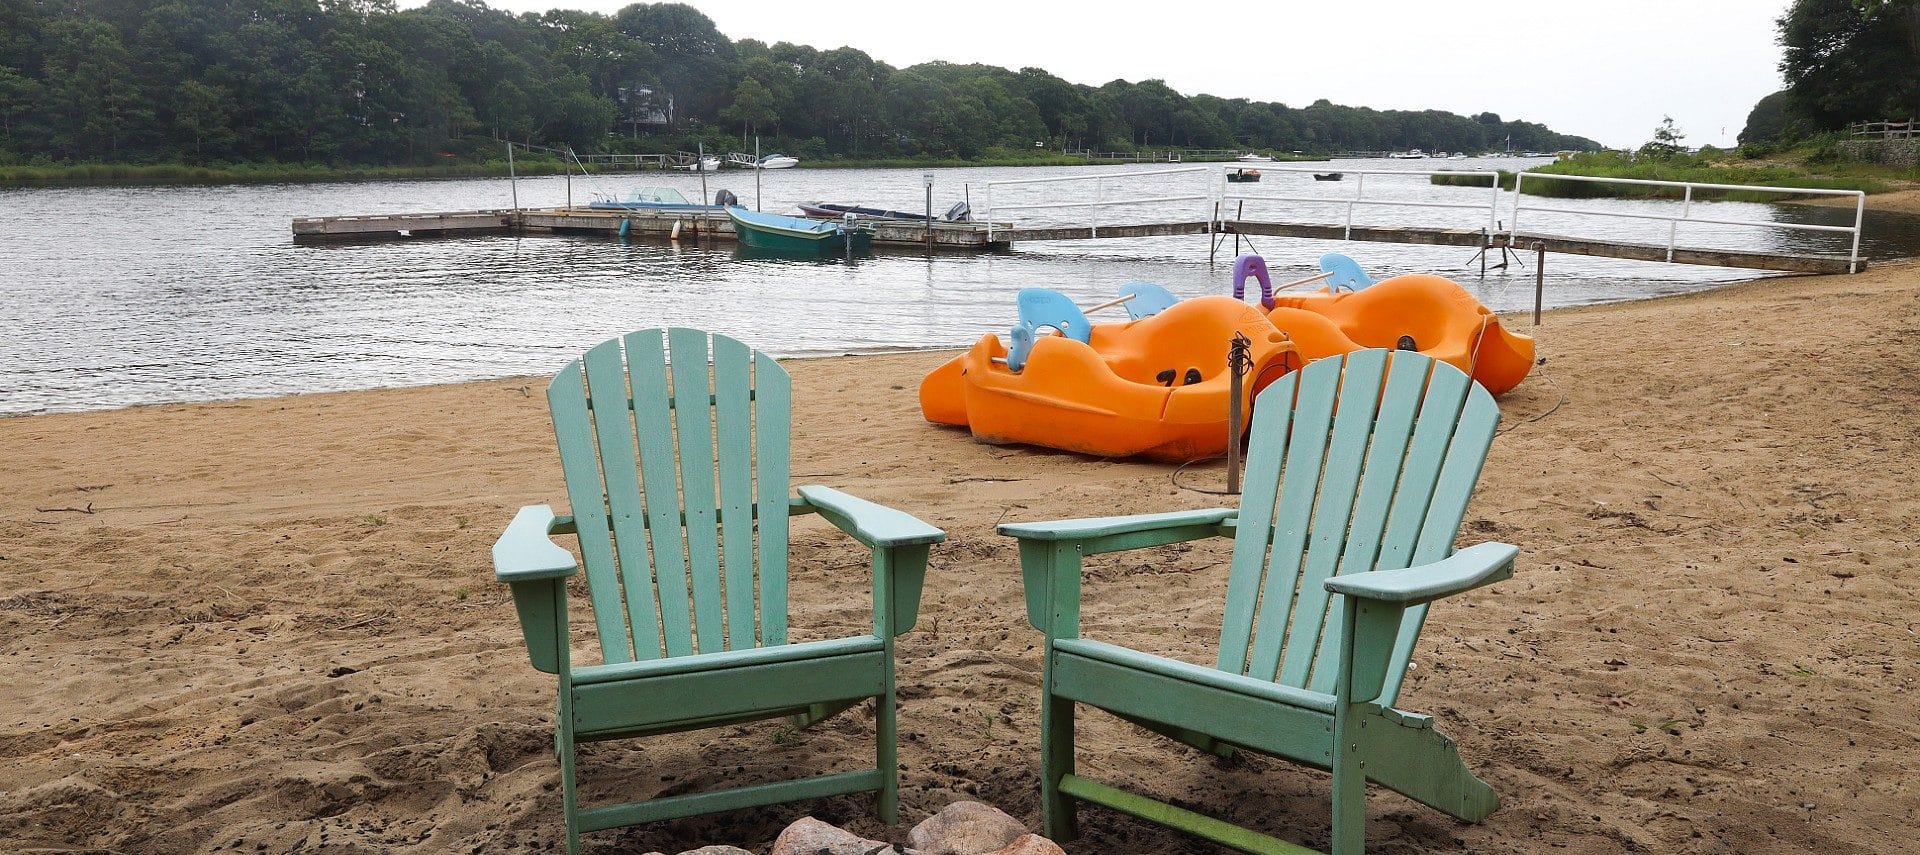 Two green adirondack chairs on a beach with paddle boats and a long dock